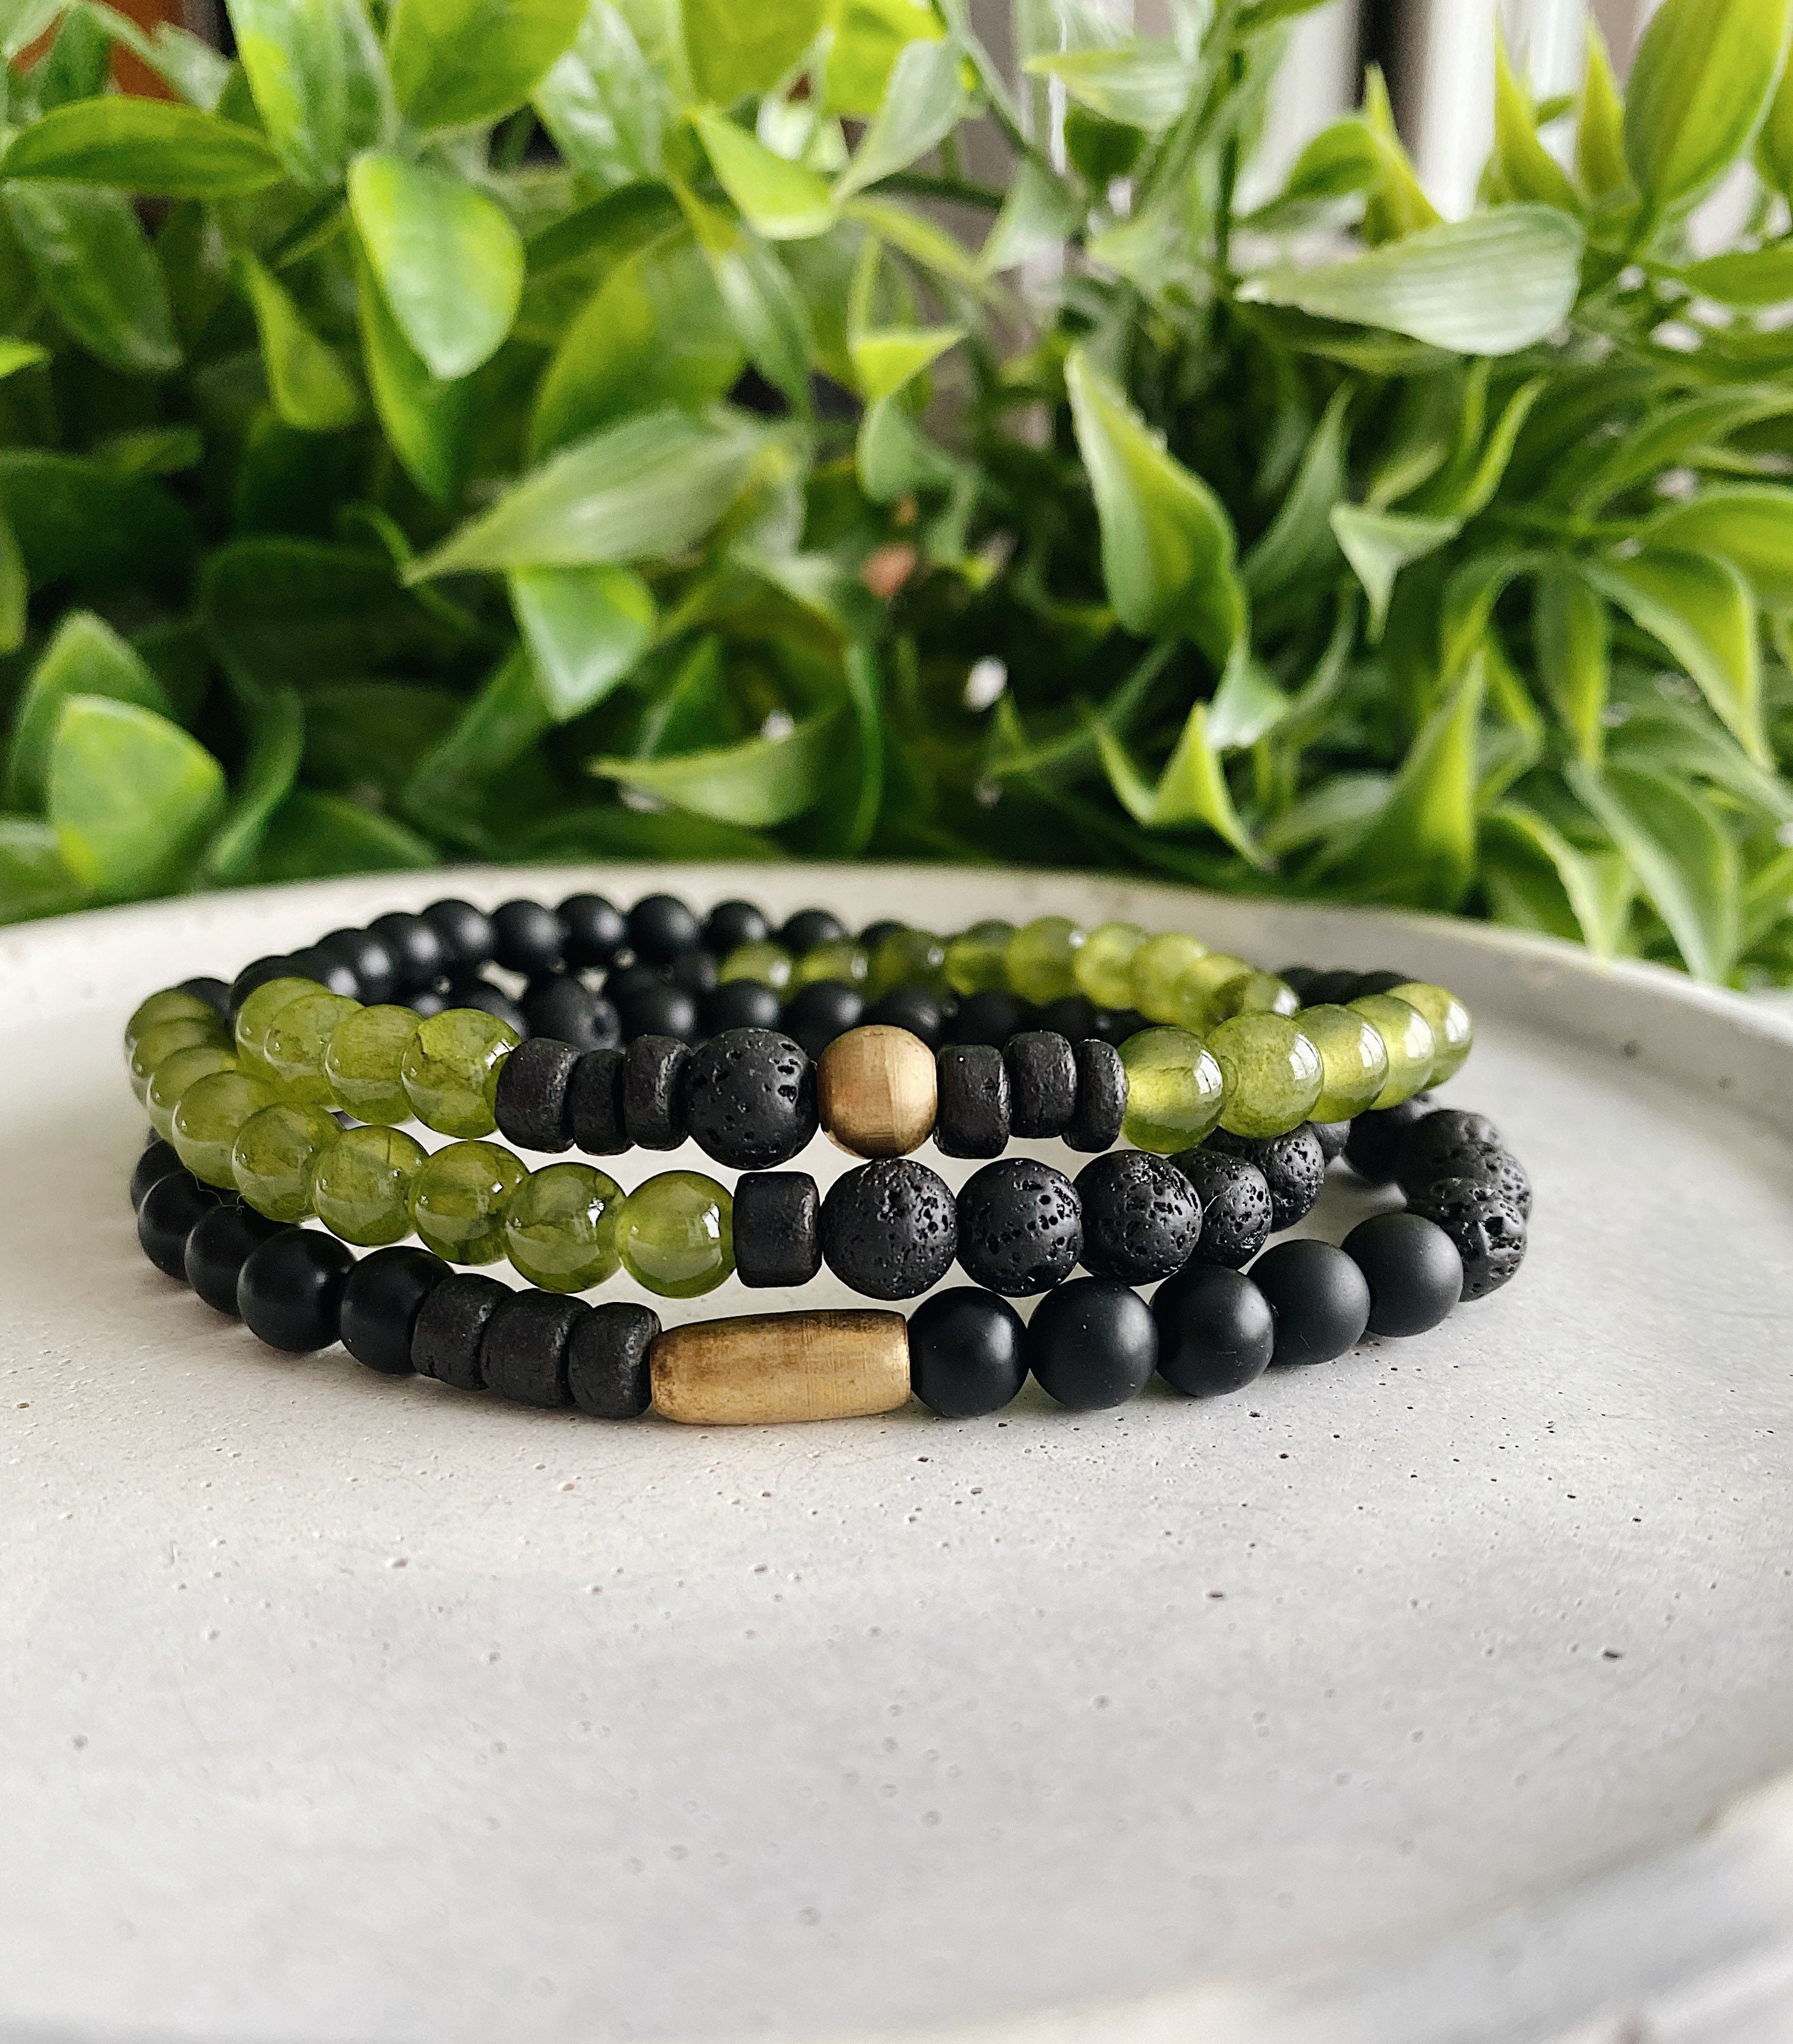 DIVINE ELEMENTS Base Metal Natural Dark Green Jade Bracelet 8mm Healing Crystal  Stone For Good Luck And Harmony For Men And Women - Dr Vedant Sharmaa